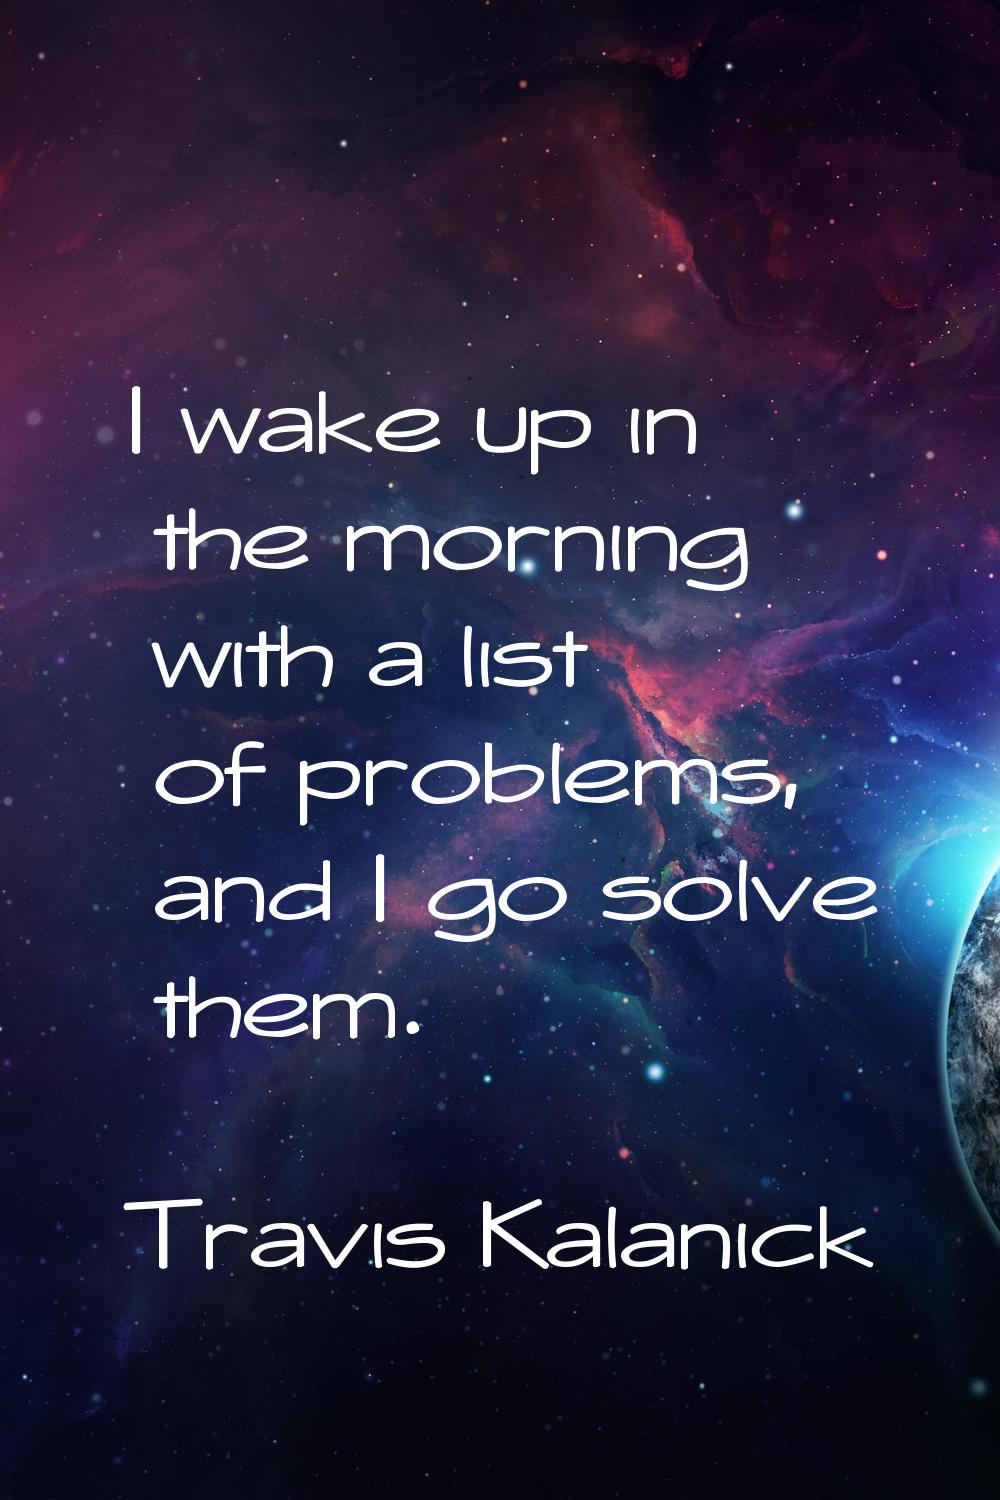 I wake up in the morning with a list of problems, and I go solve them.